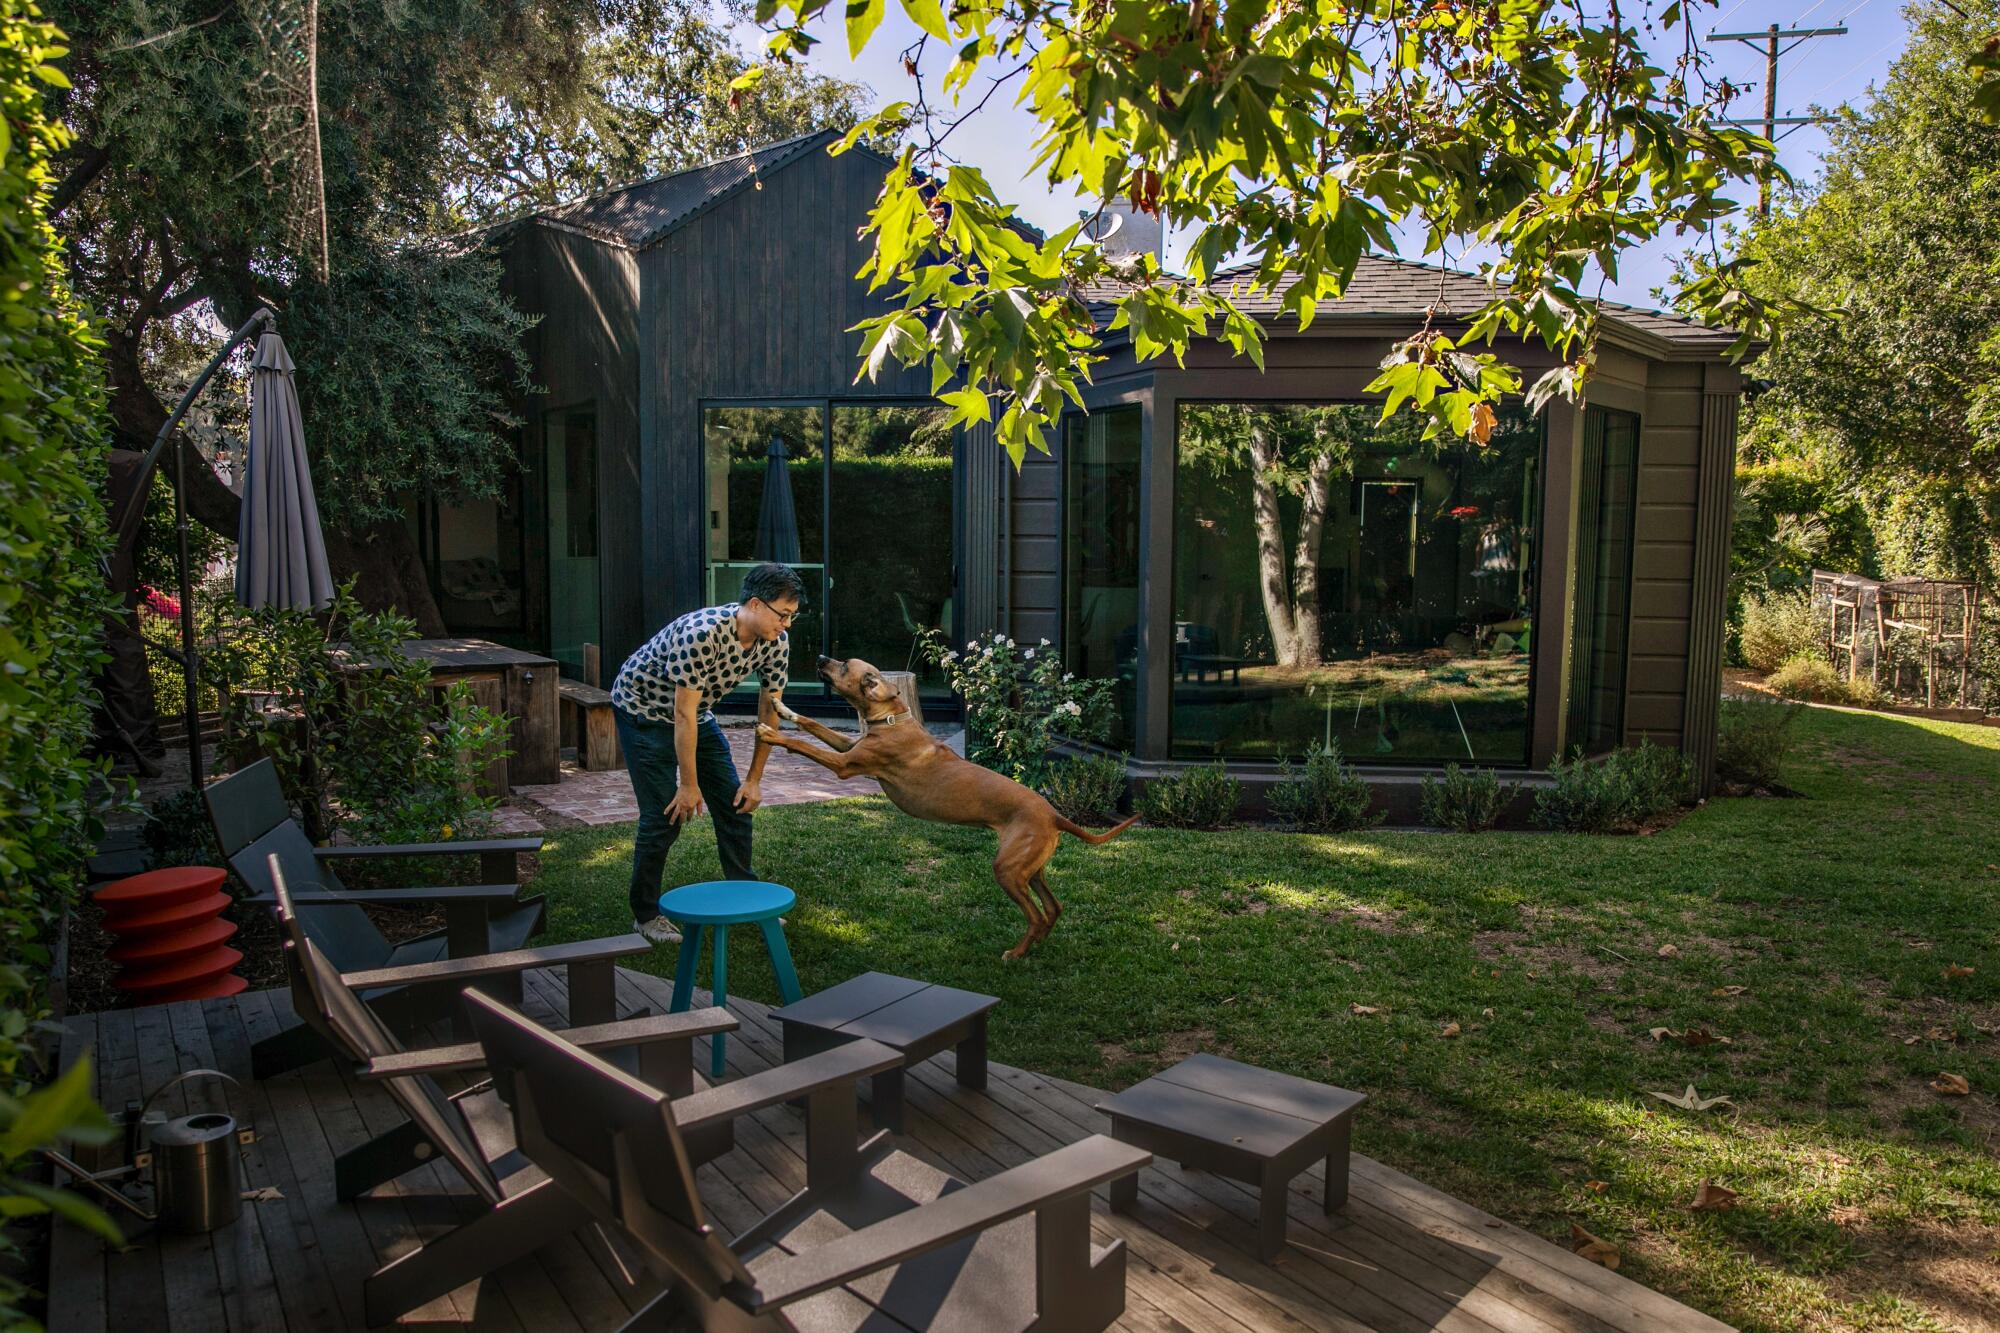 A man plays with a dog in a backyard.